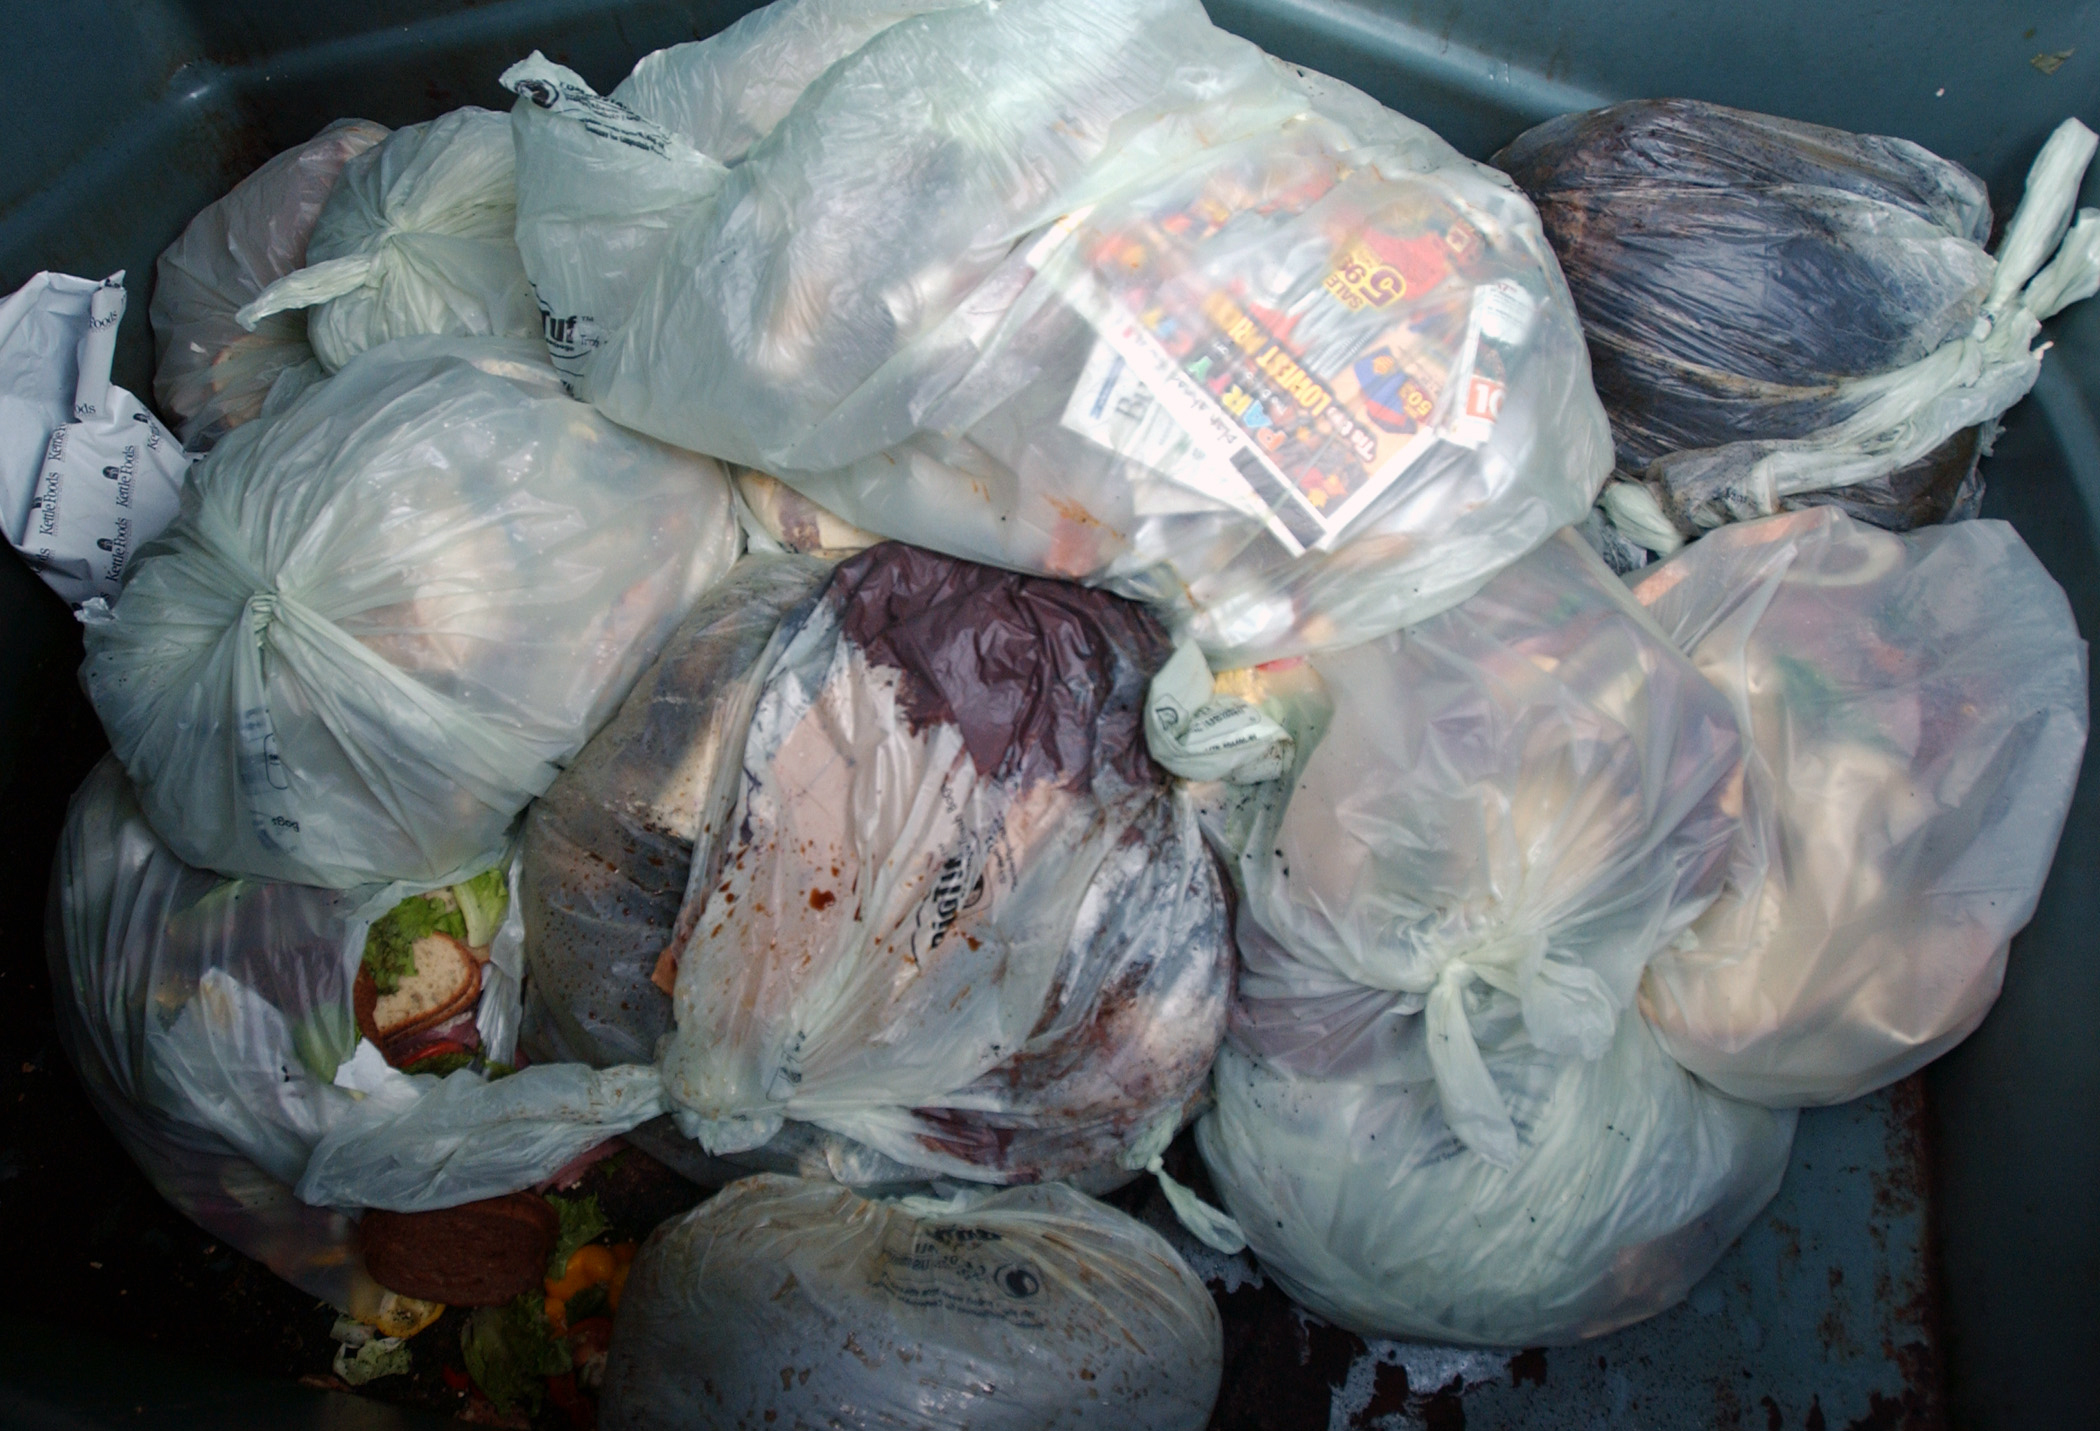 Food waste in biodegradable bags in a dumpster at Portland International Airport in Portland, Ore., Thursday Nov. 20, 2008.